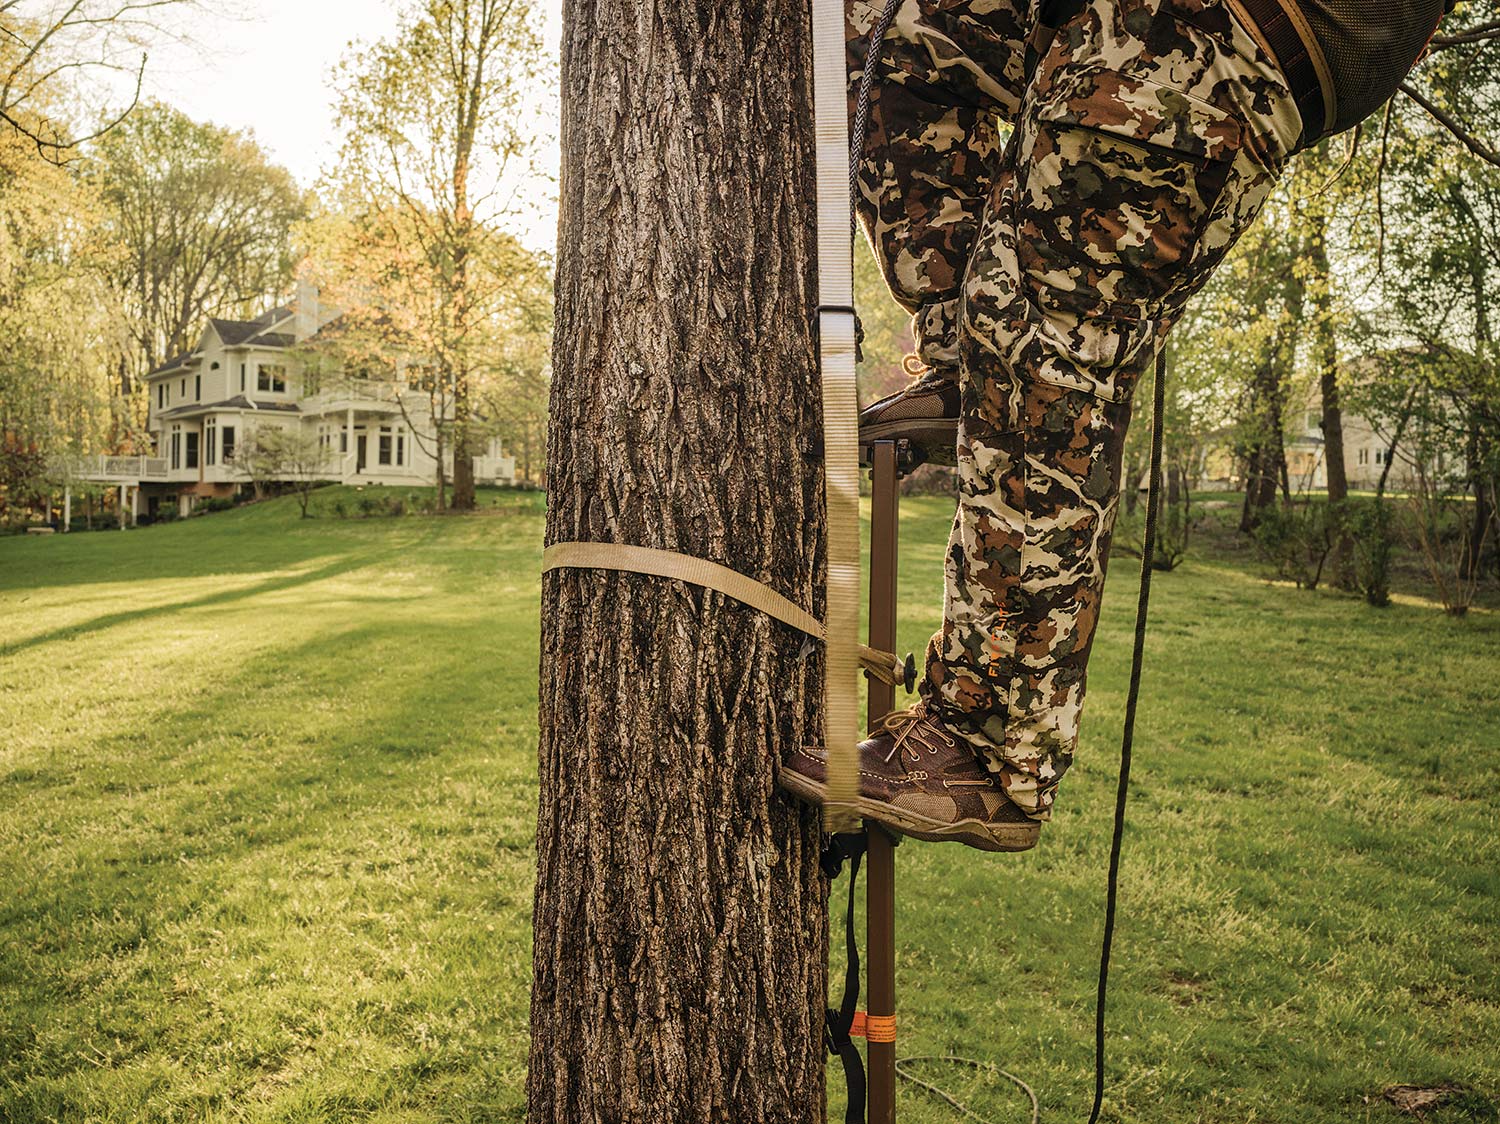 A hunter uses a tree stand in his back yard in the suburbs.